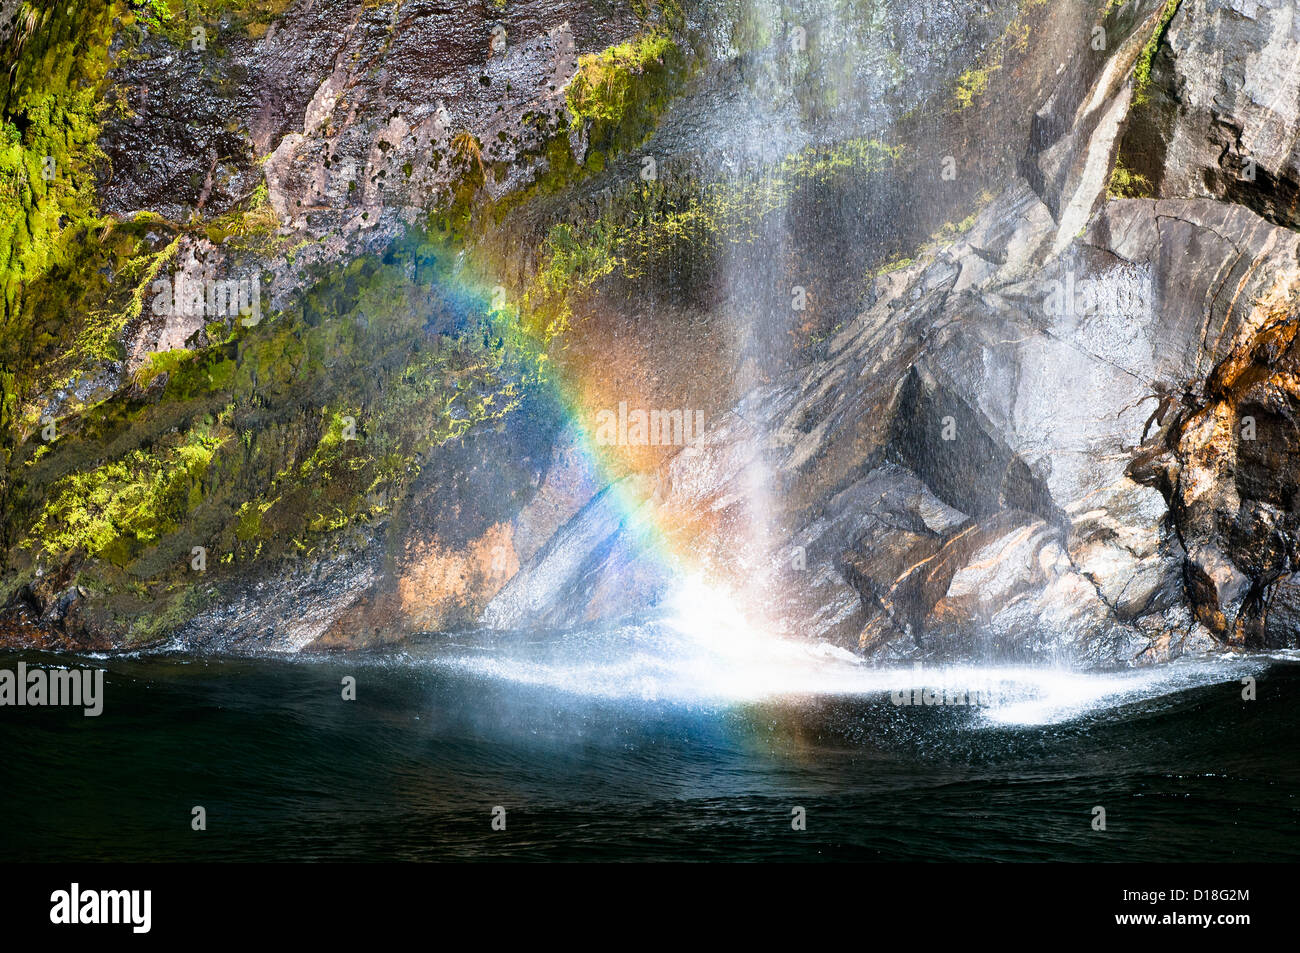 Rainbow in waterfall over cliffs Stock Photo